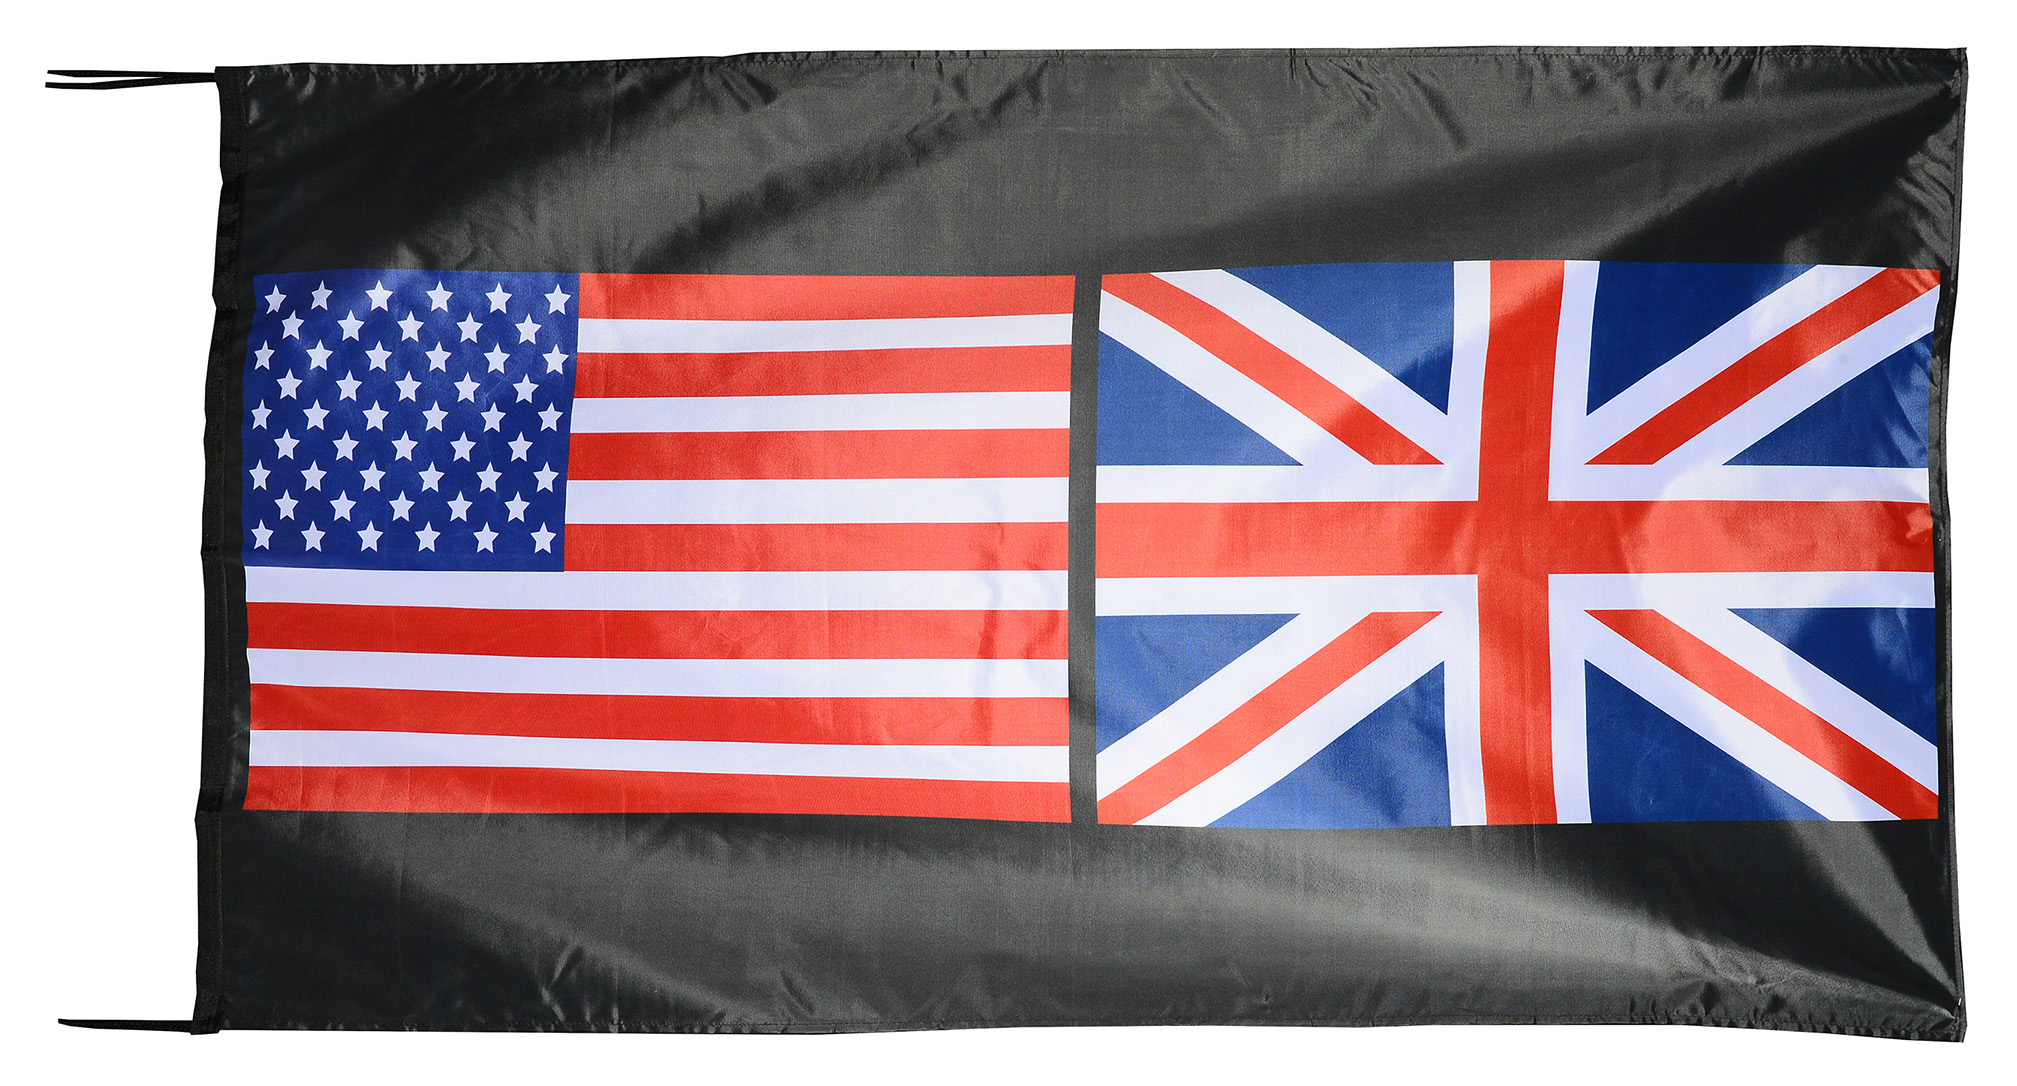 Flag  014 USA / US Country / United States Of America and United Kingdom / American Patriotic / Pride Hybrid Weather-Resistant Polyester Outdoor Flag Landscape Banner / Vivid Colors / 3 X 5 FT (150 x 90cm) International Flags for Sale